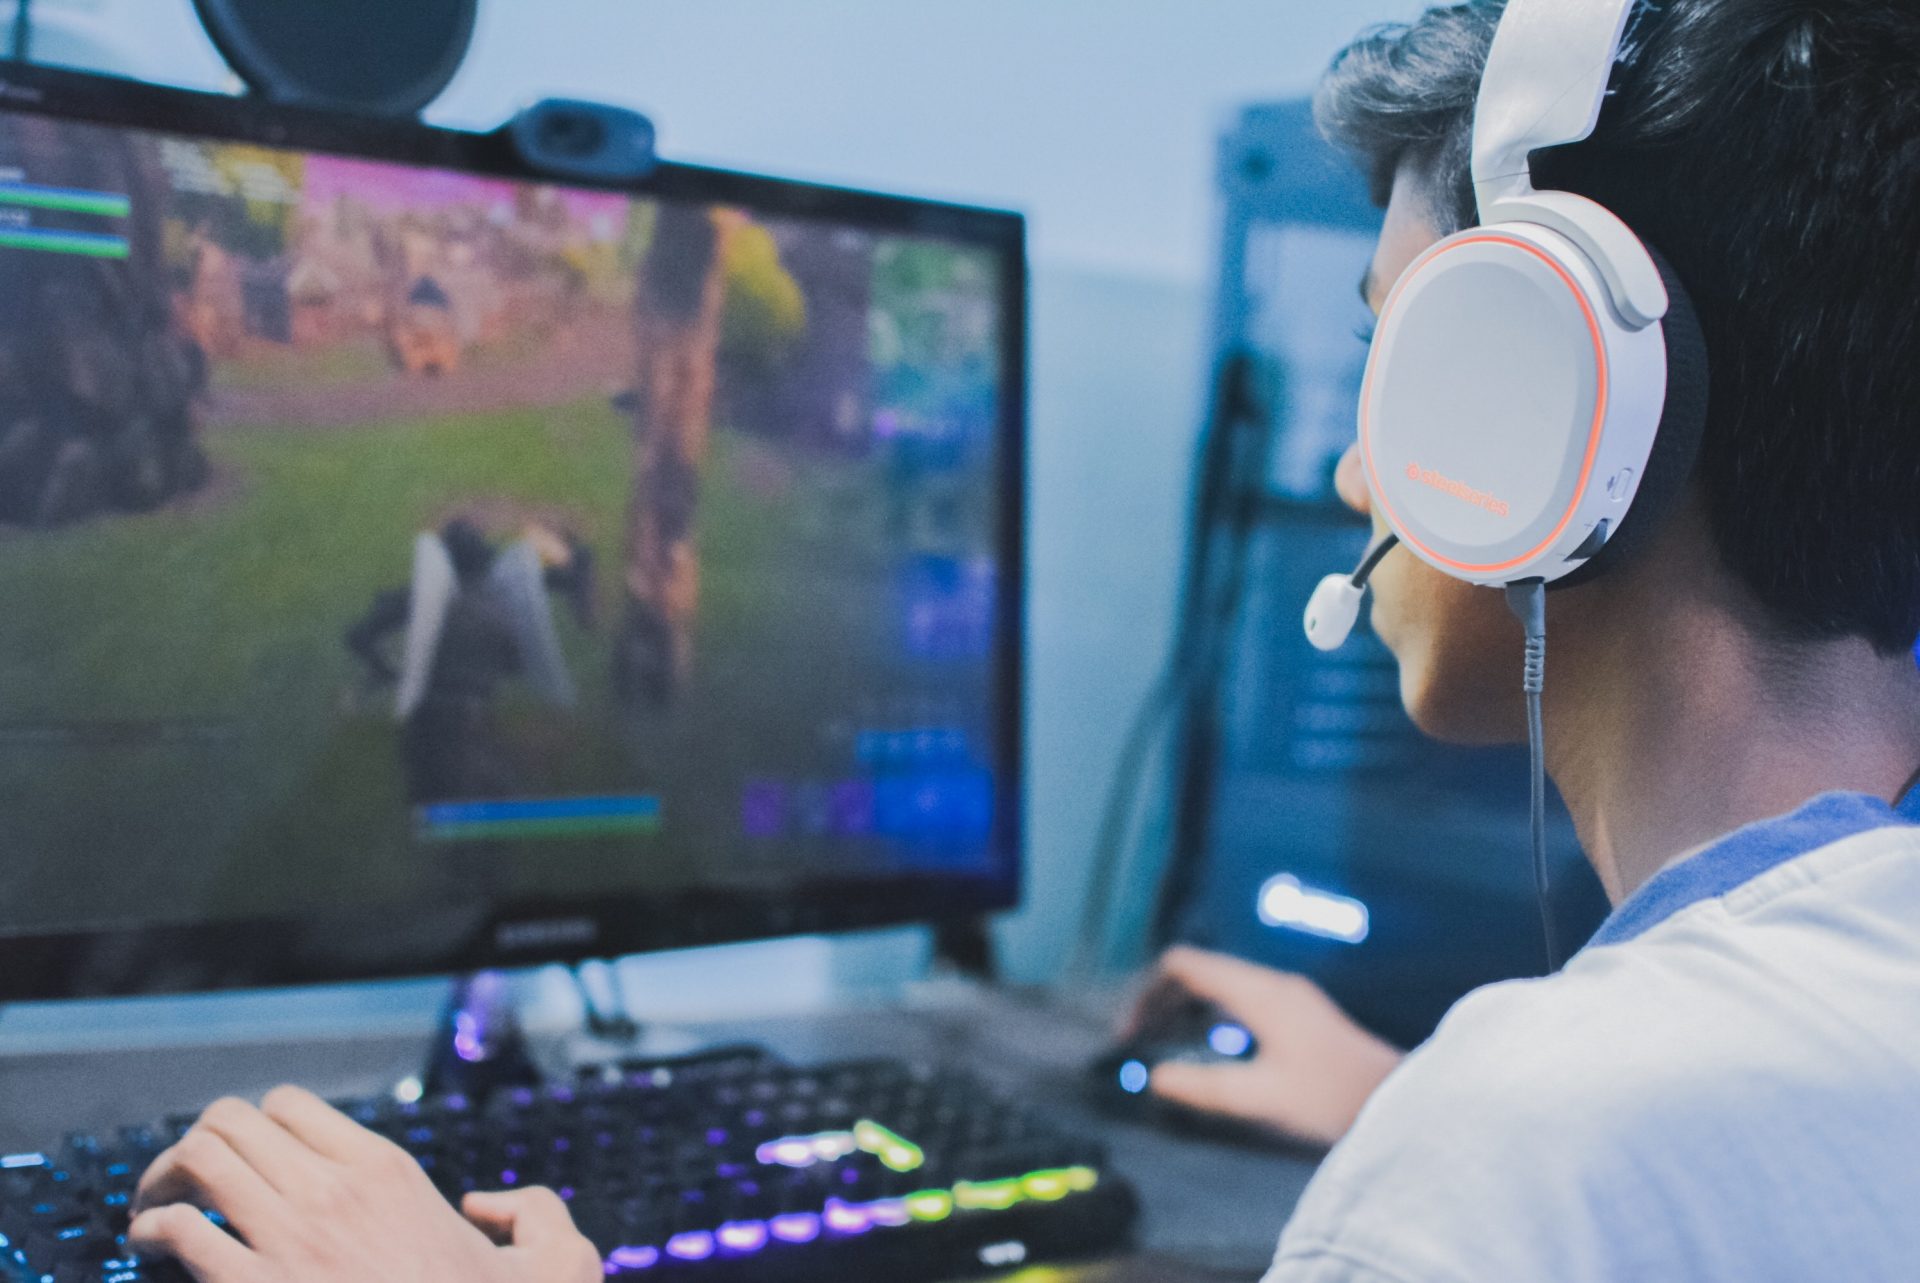 Image of a boy playing Fortnite on a PC